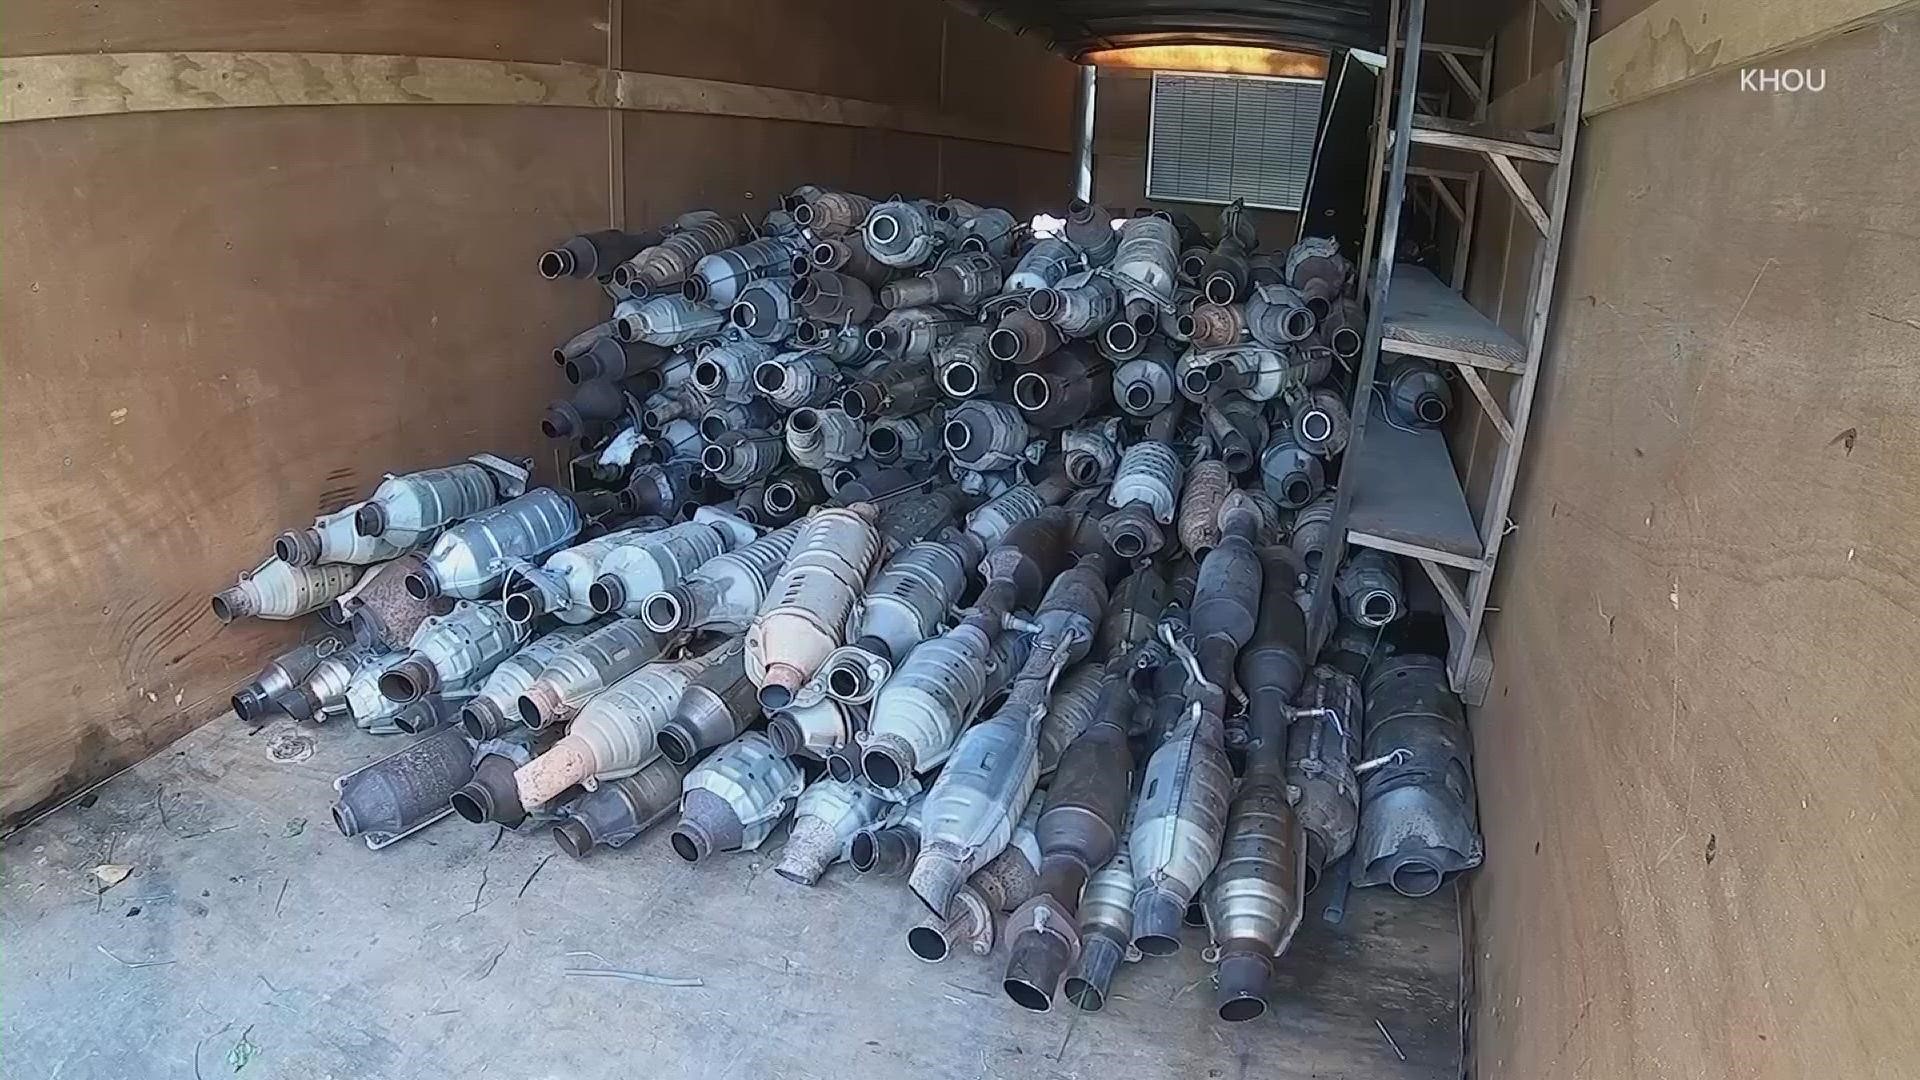 More than 500 catalytic converters were seized in an early morning raid Thursday. Seven homes throughout the Houston area, including a warehouse, were hit.